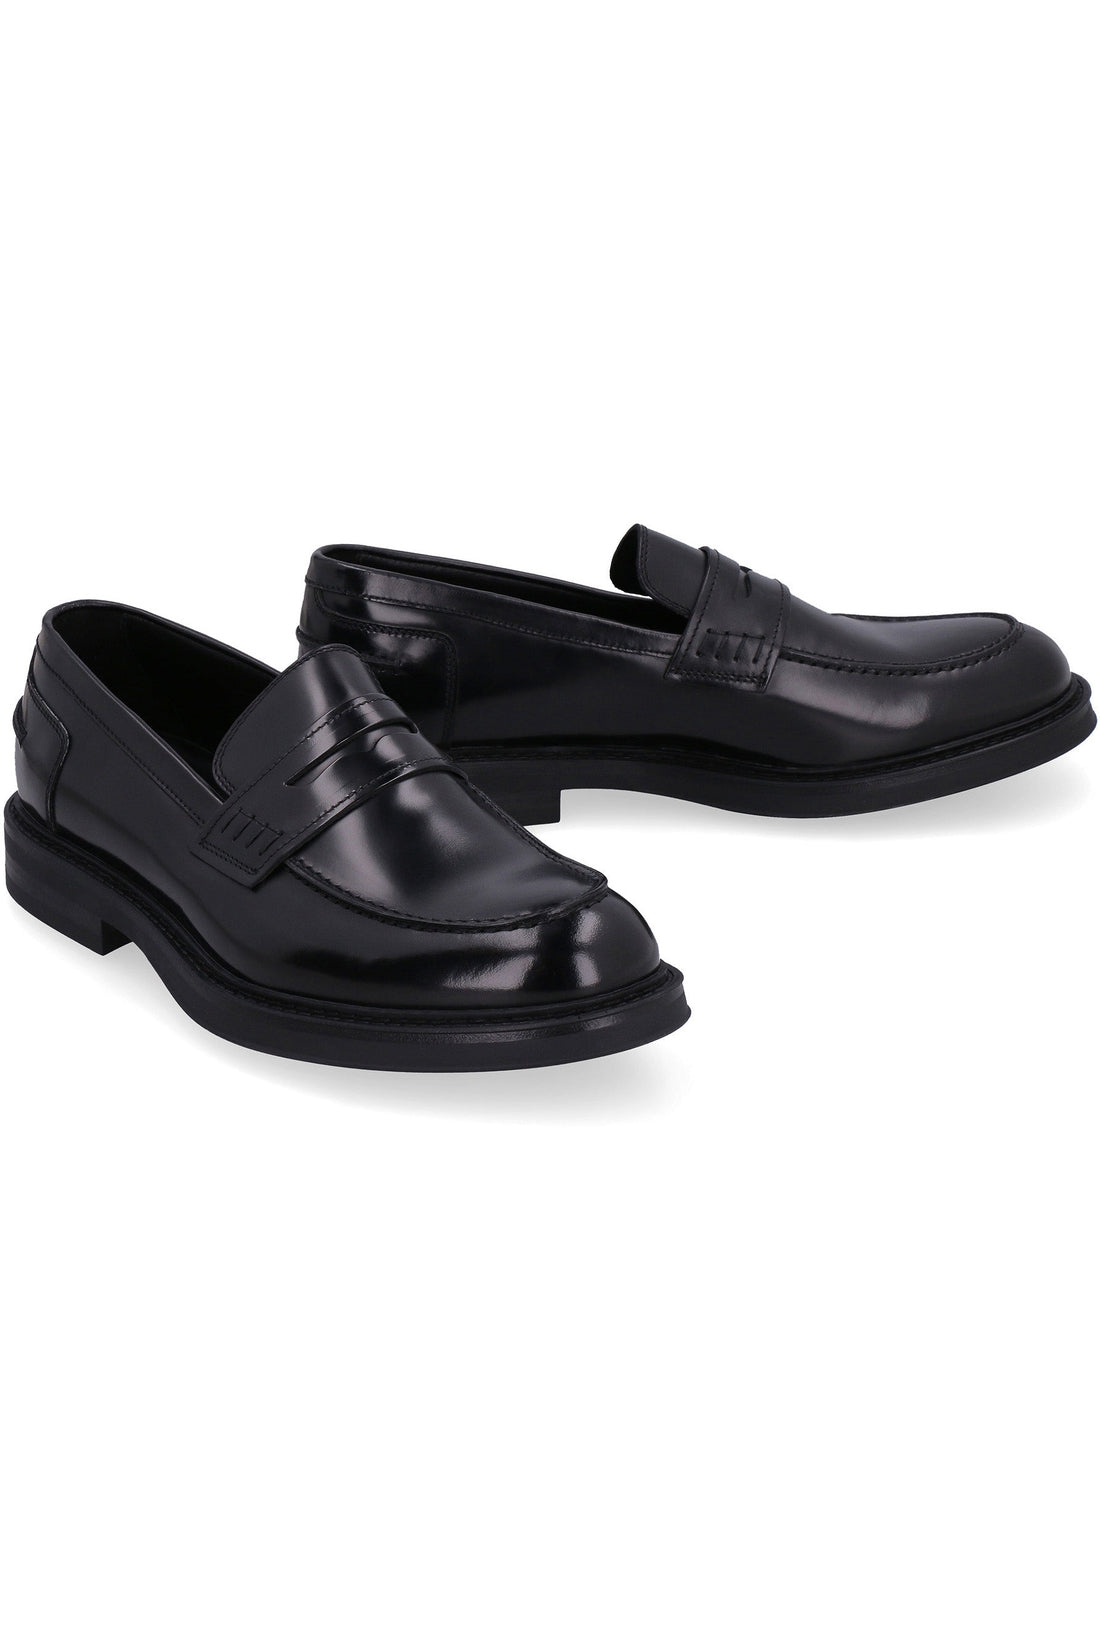 Doucal's-OUTLET-SALE-Calfskin loafers-ARCHIVIST